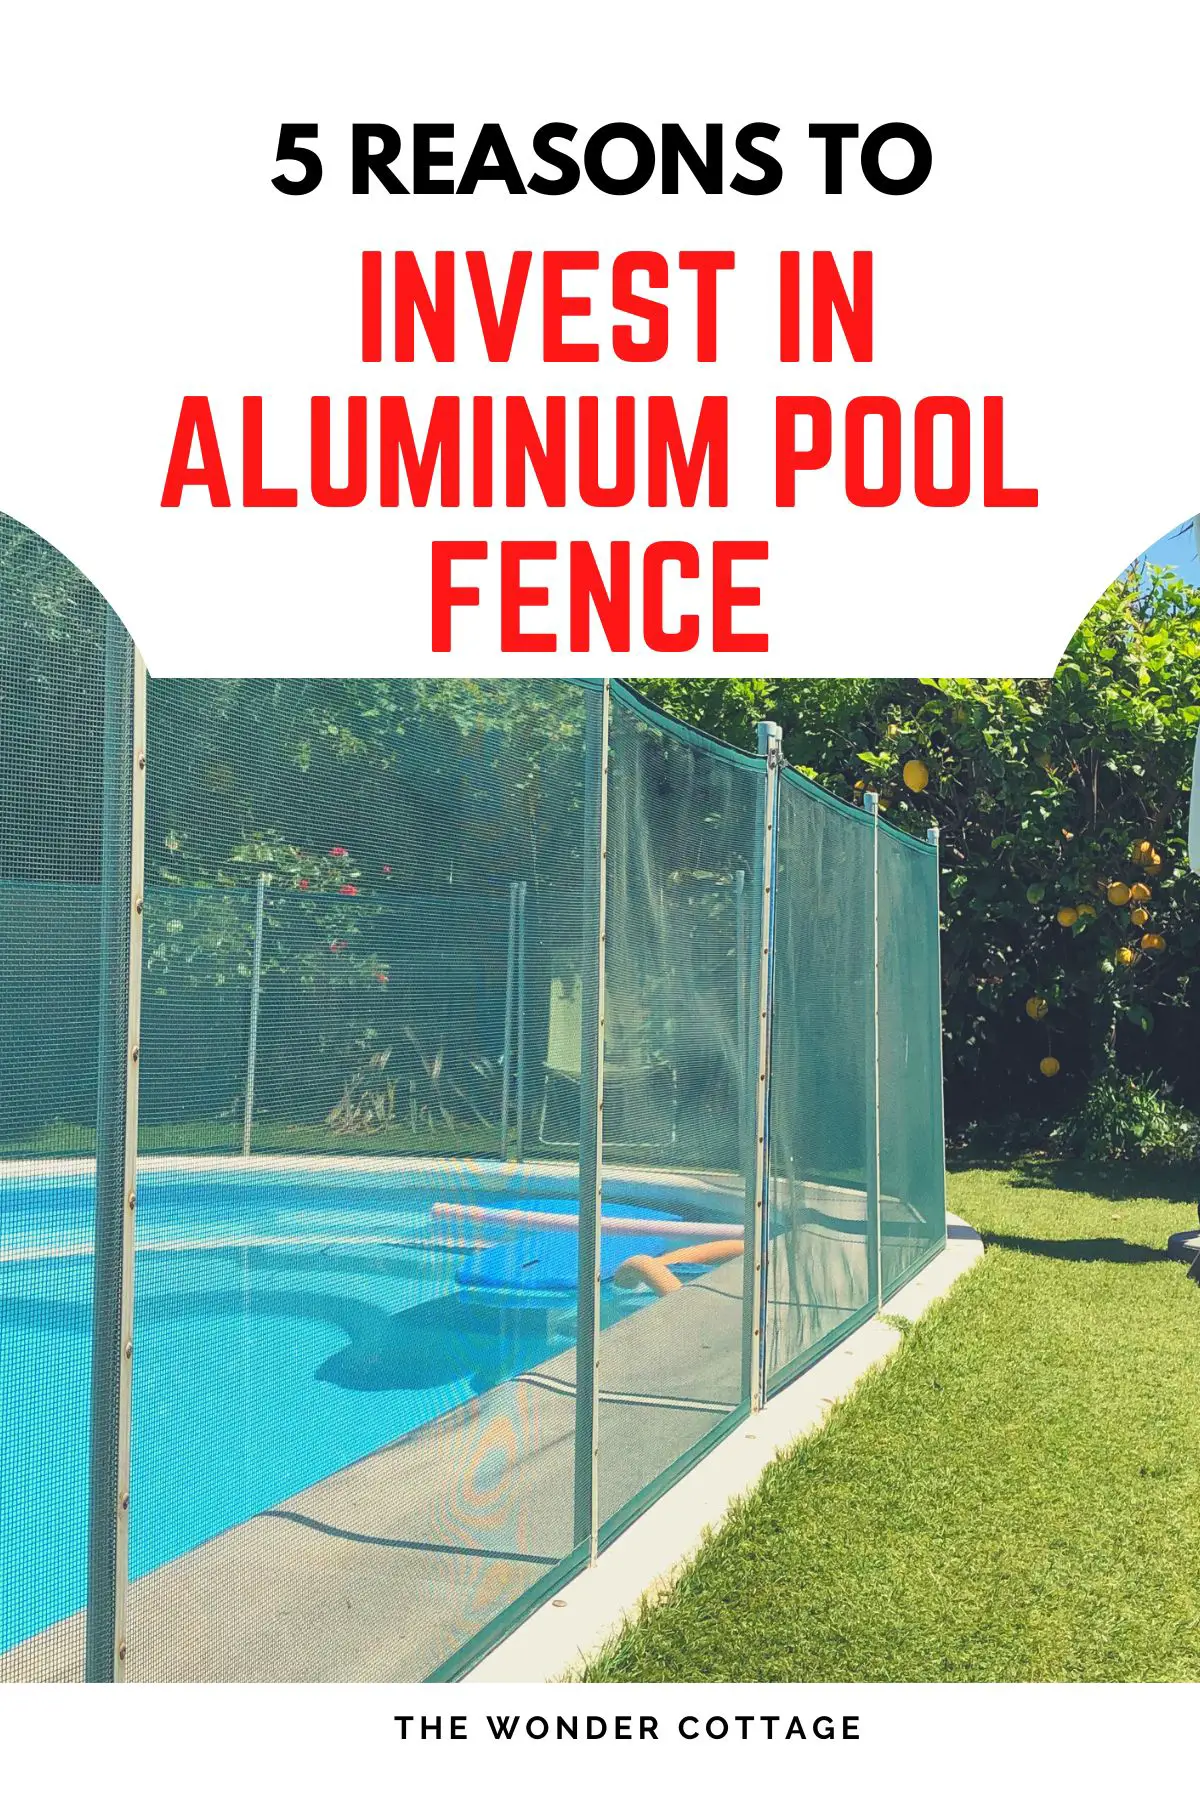 Why Should Homeowners Invest In Aluminum Pool Fence?